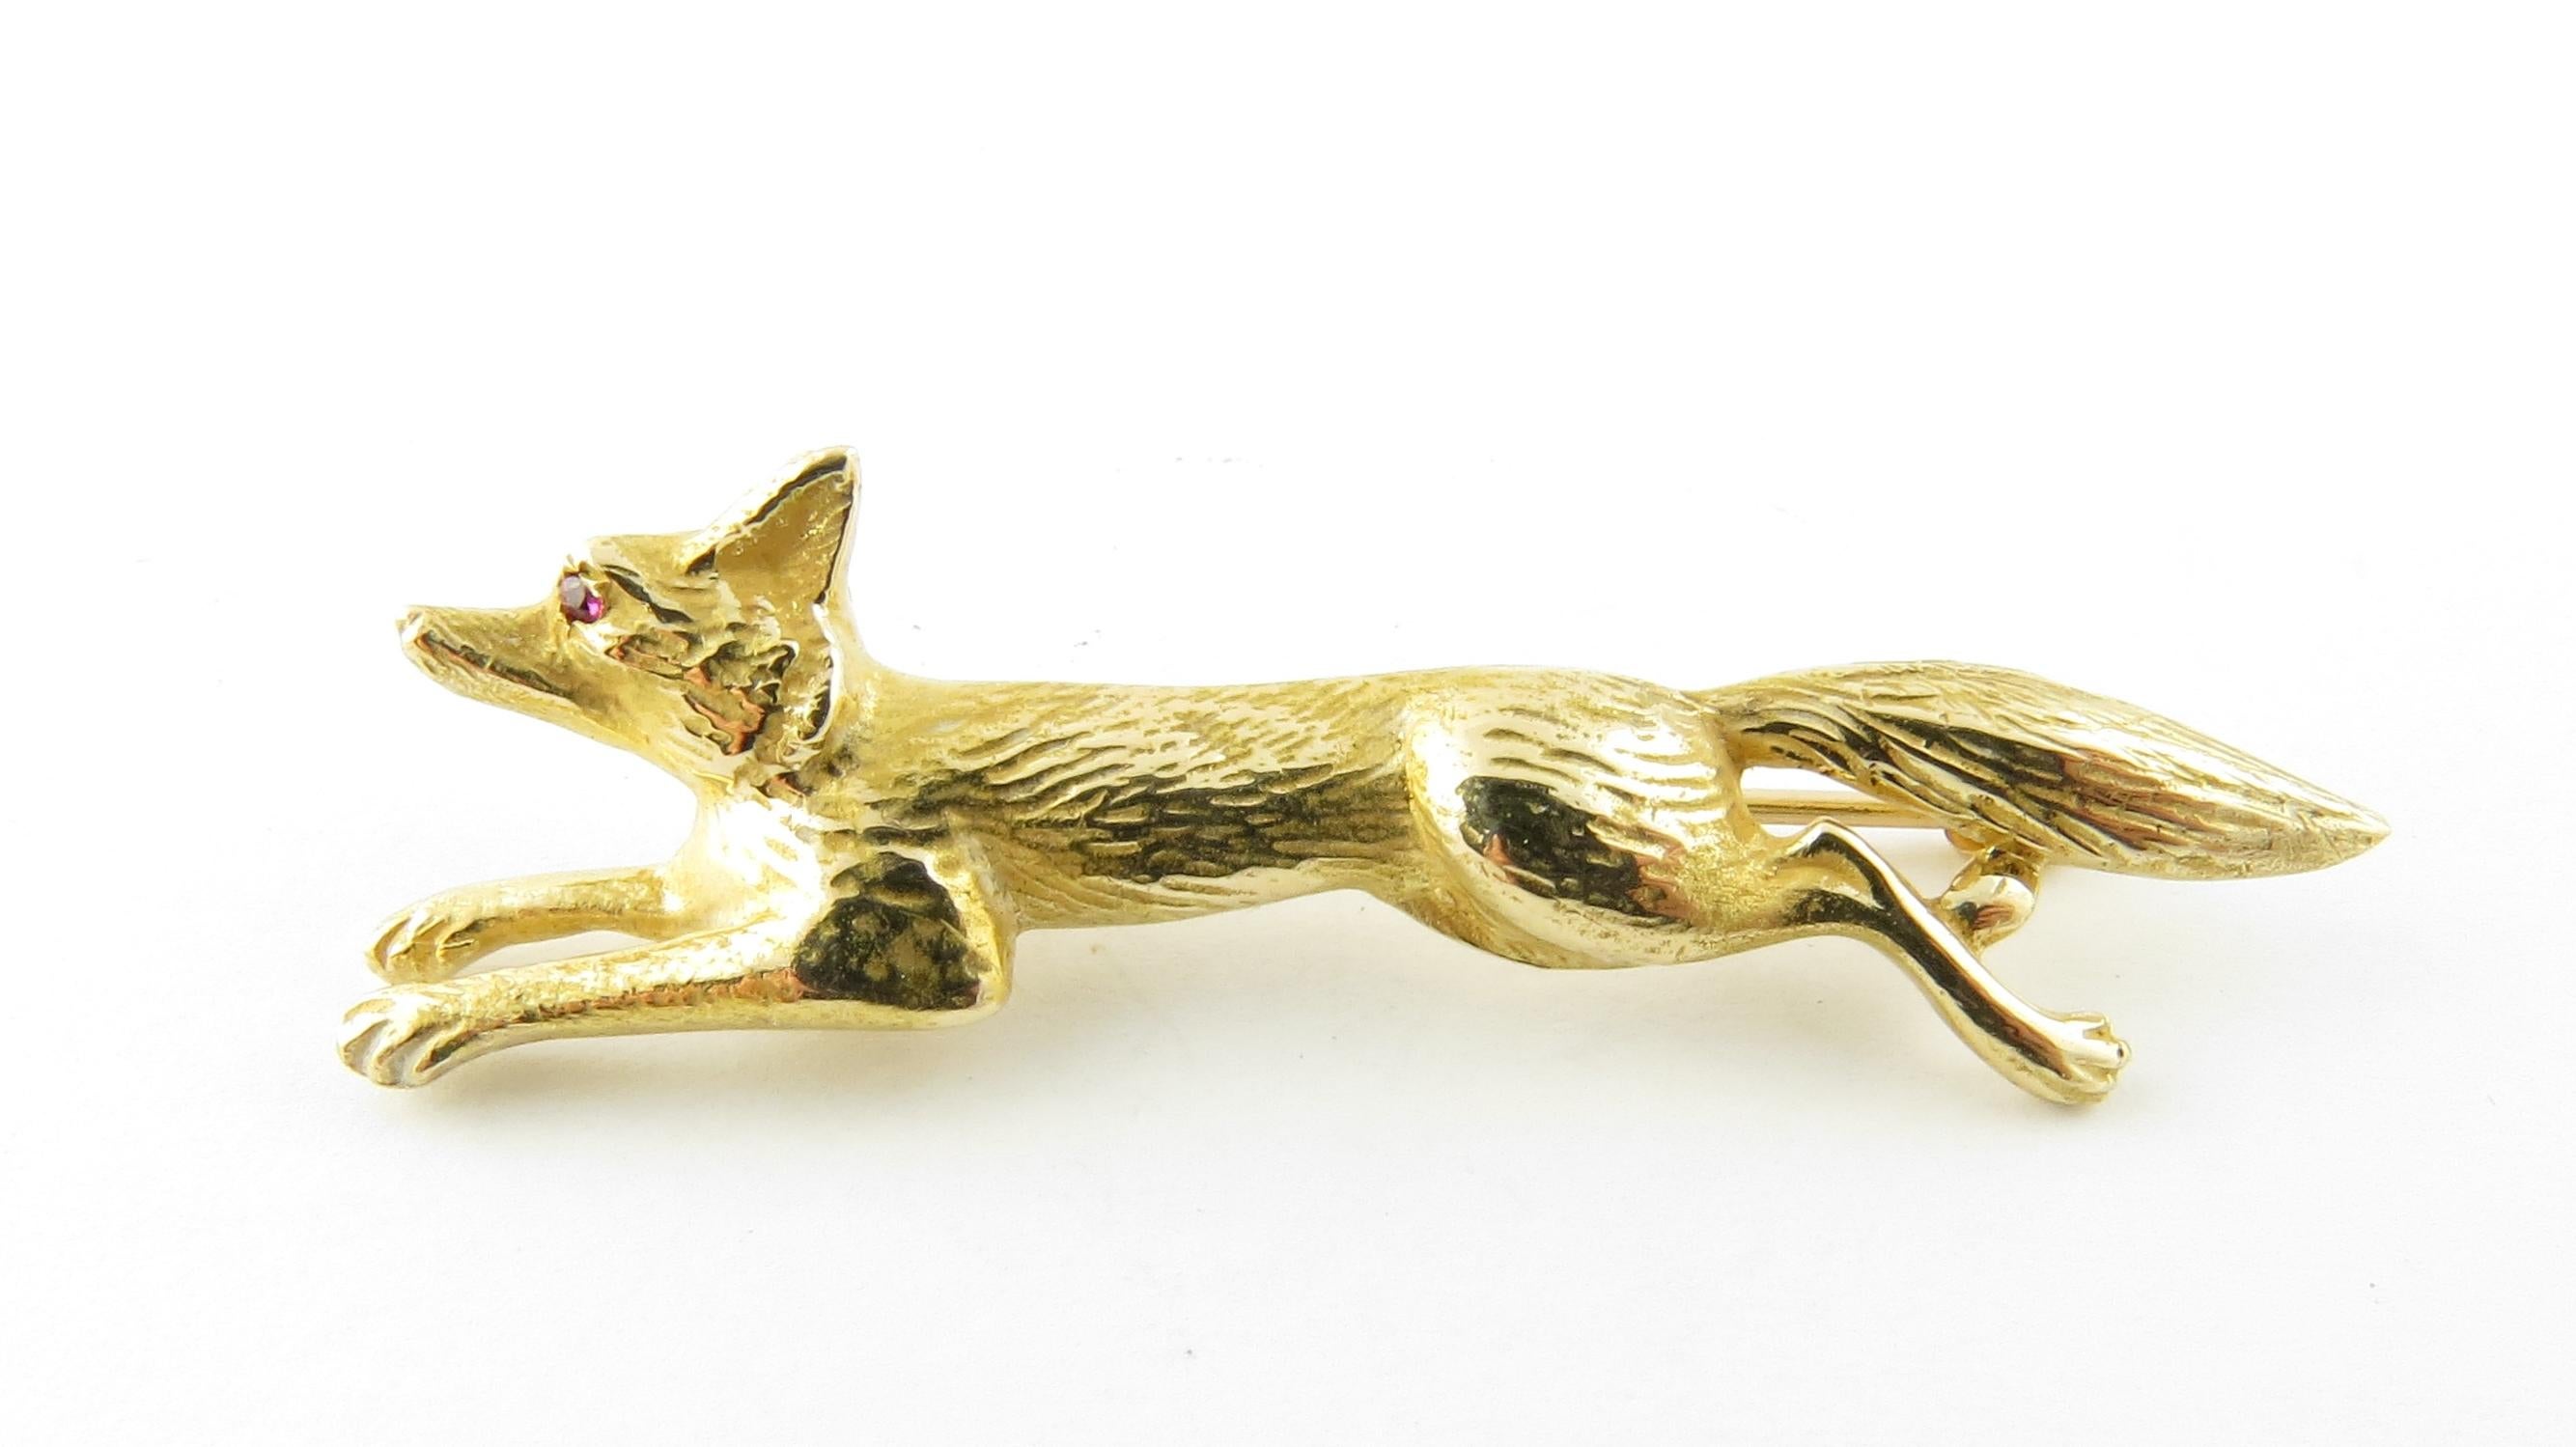 Vintage 14 Karat Yellow Gold Fox Brooch / Pin

This elegant pin features a fox in motion meticulously detailed in classic 14K yellow gold and one genuine ruby eye.

Size: 43 mm x 14 mm

Weight: 4.0 dwt. / 6.3 gr.

Stamped: 14K

Very good condition,